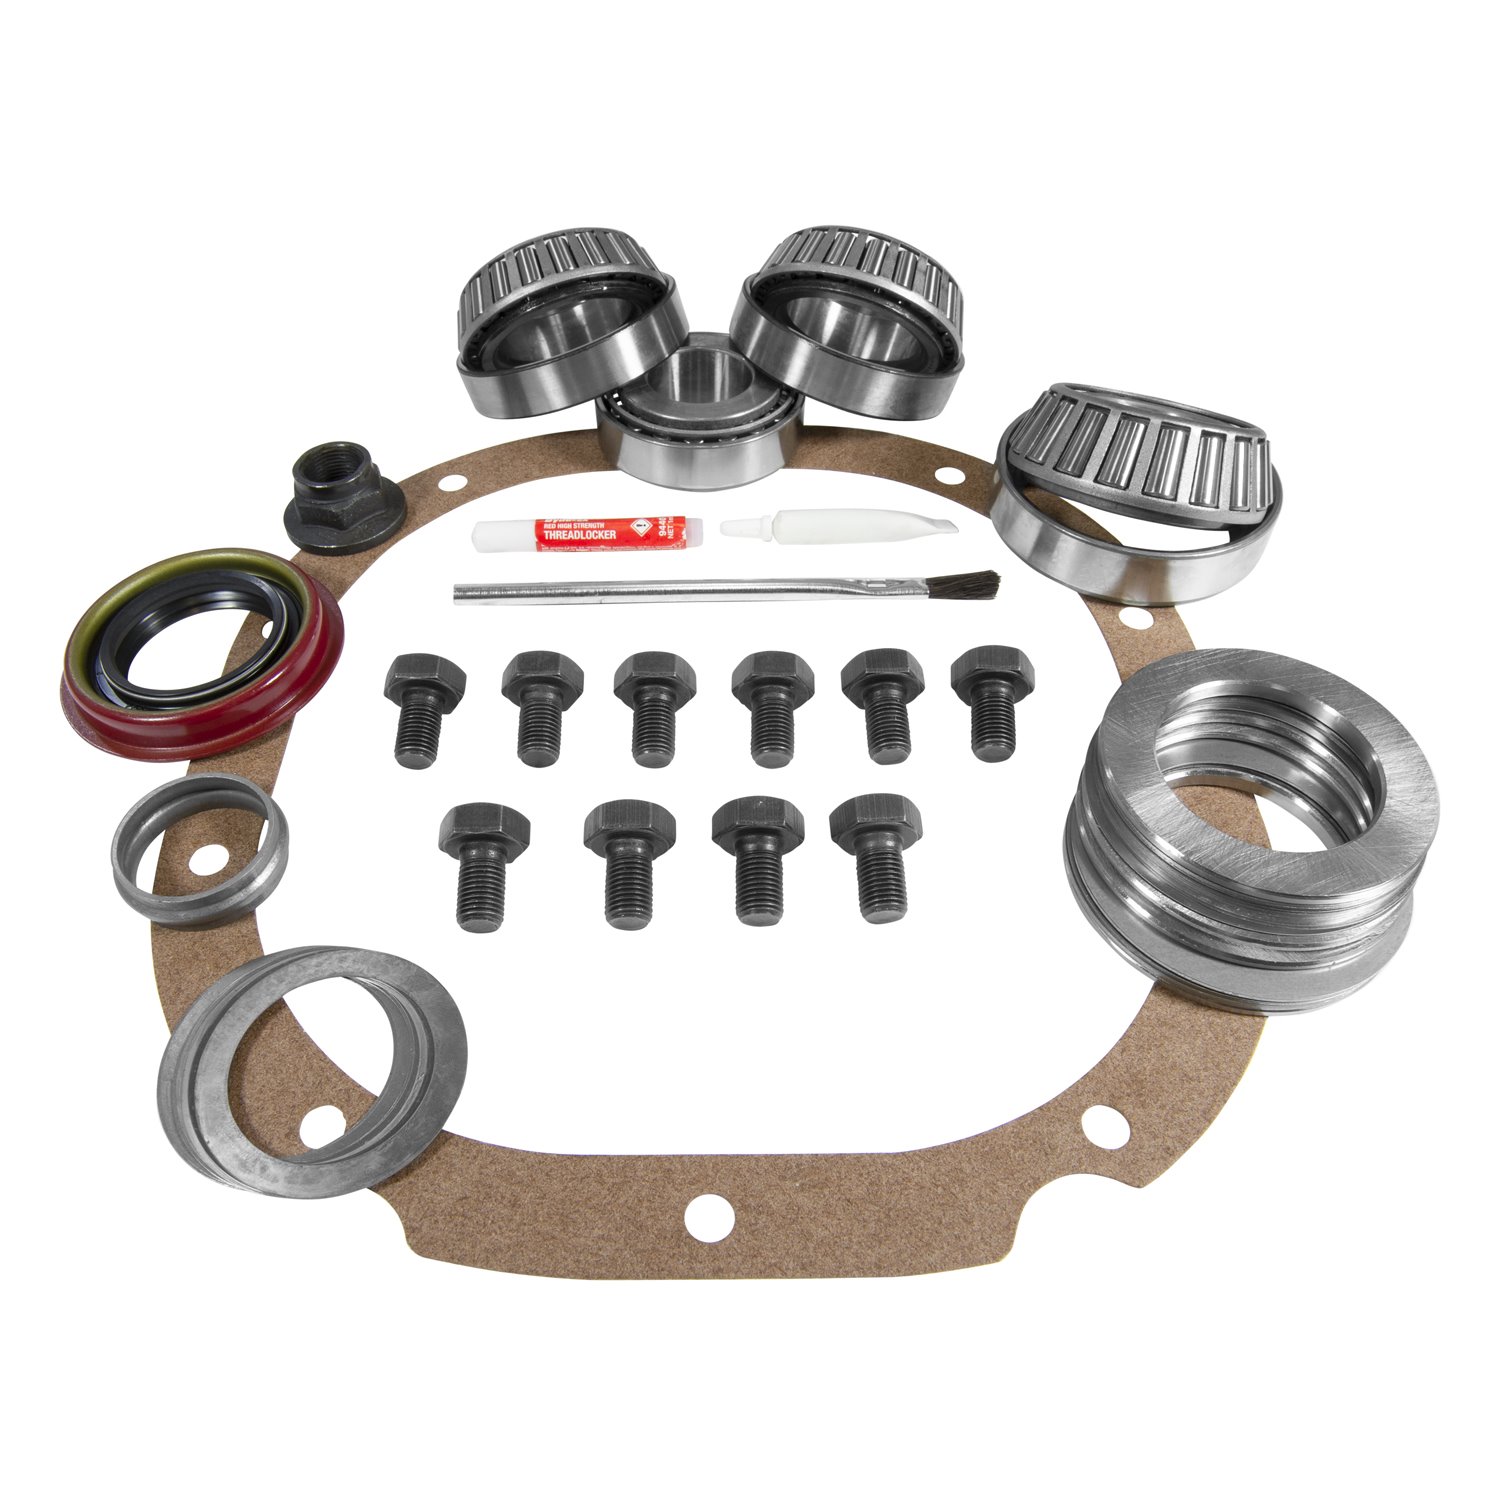 USA Standard ZK F7.5 Master Overhaul Kit, For The Ford 7.5 Differential